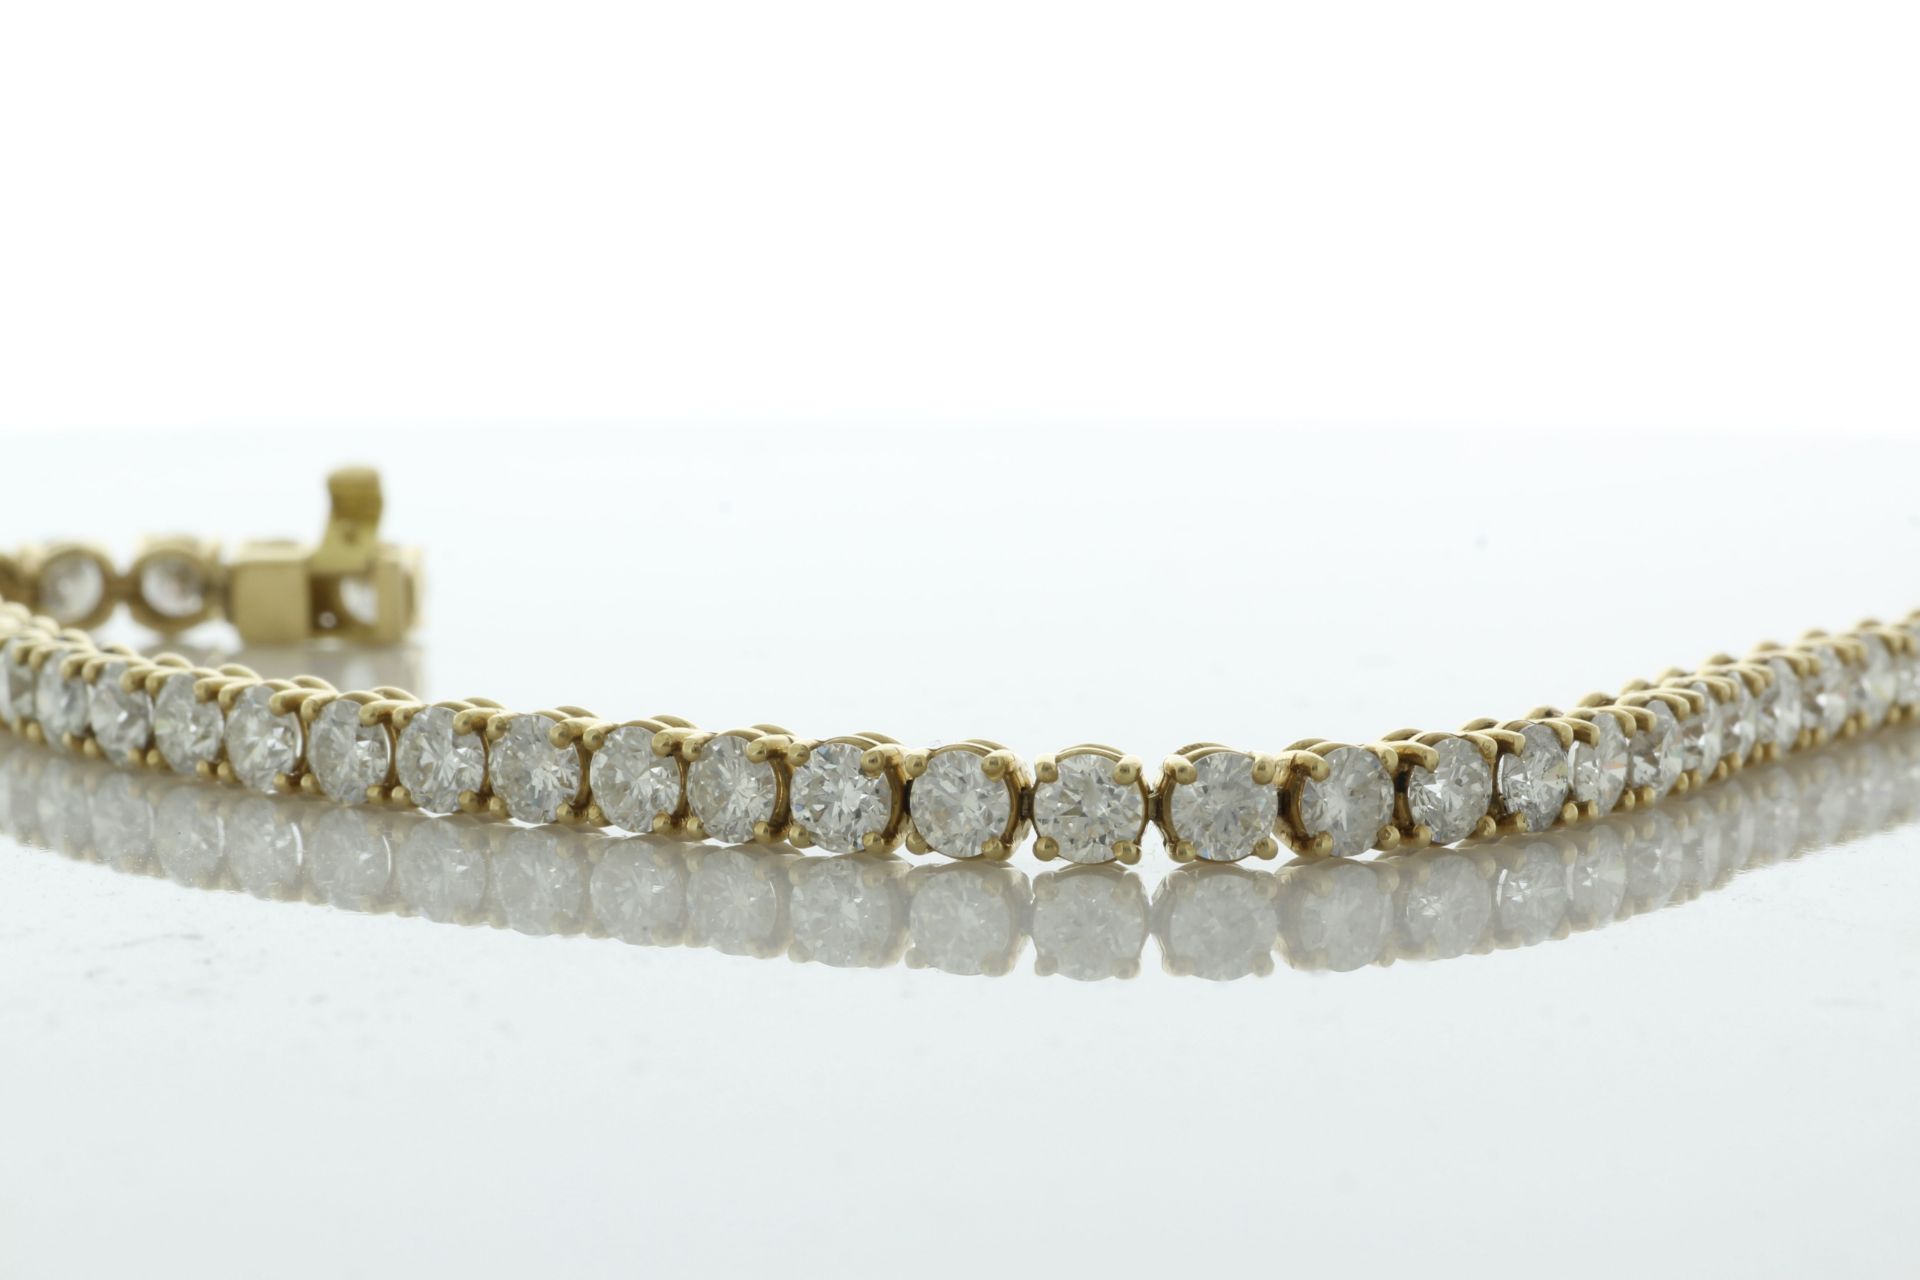 18ct Yellow Gold Tennis Diamond Bracelet 10.15 Carats - Valued By IDI £52,605.00 - Forty one - Image 2 of 5